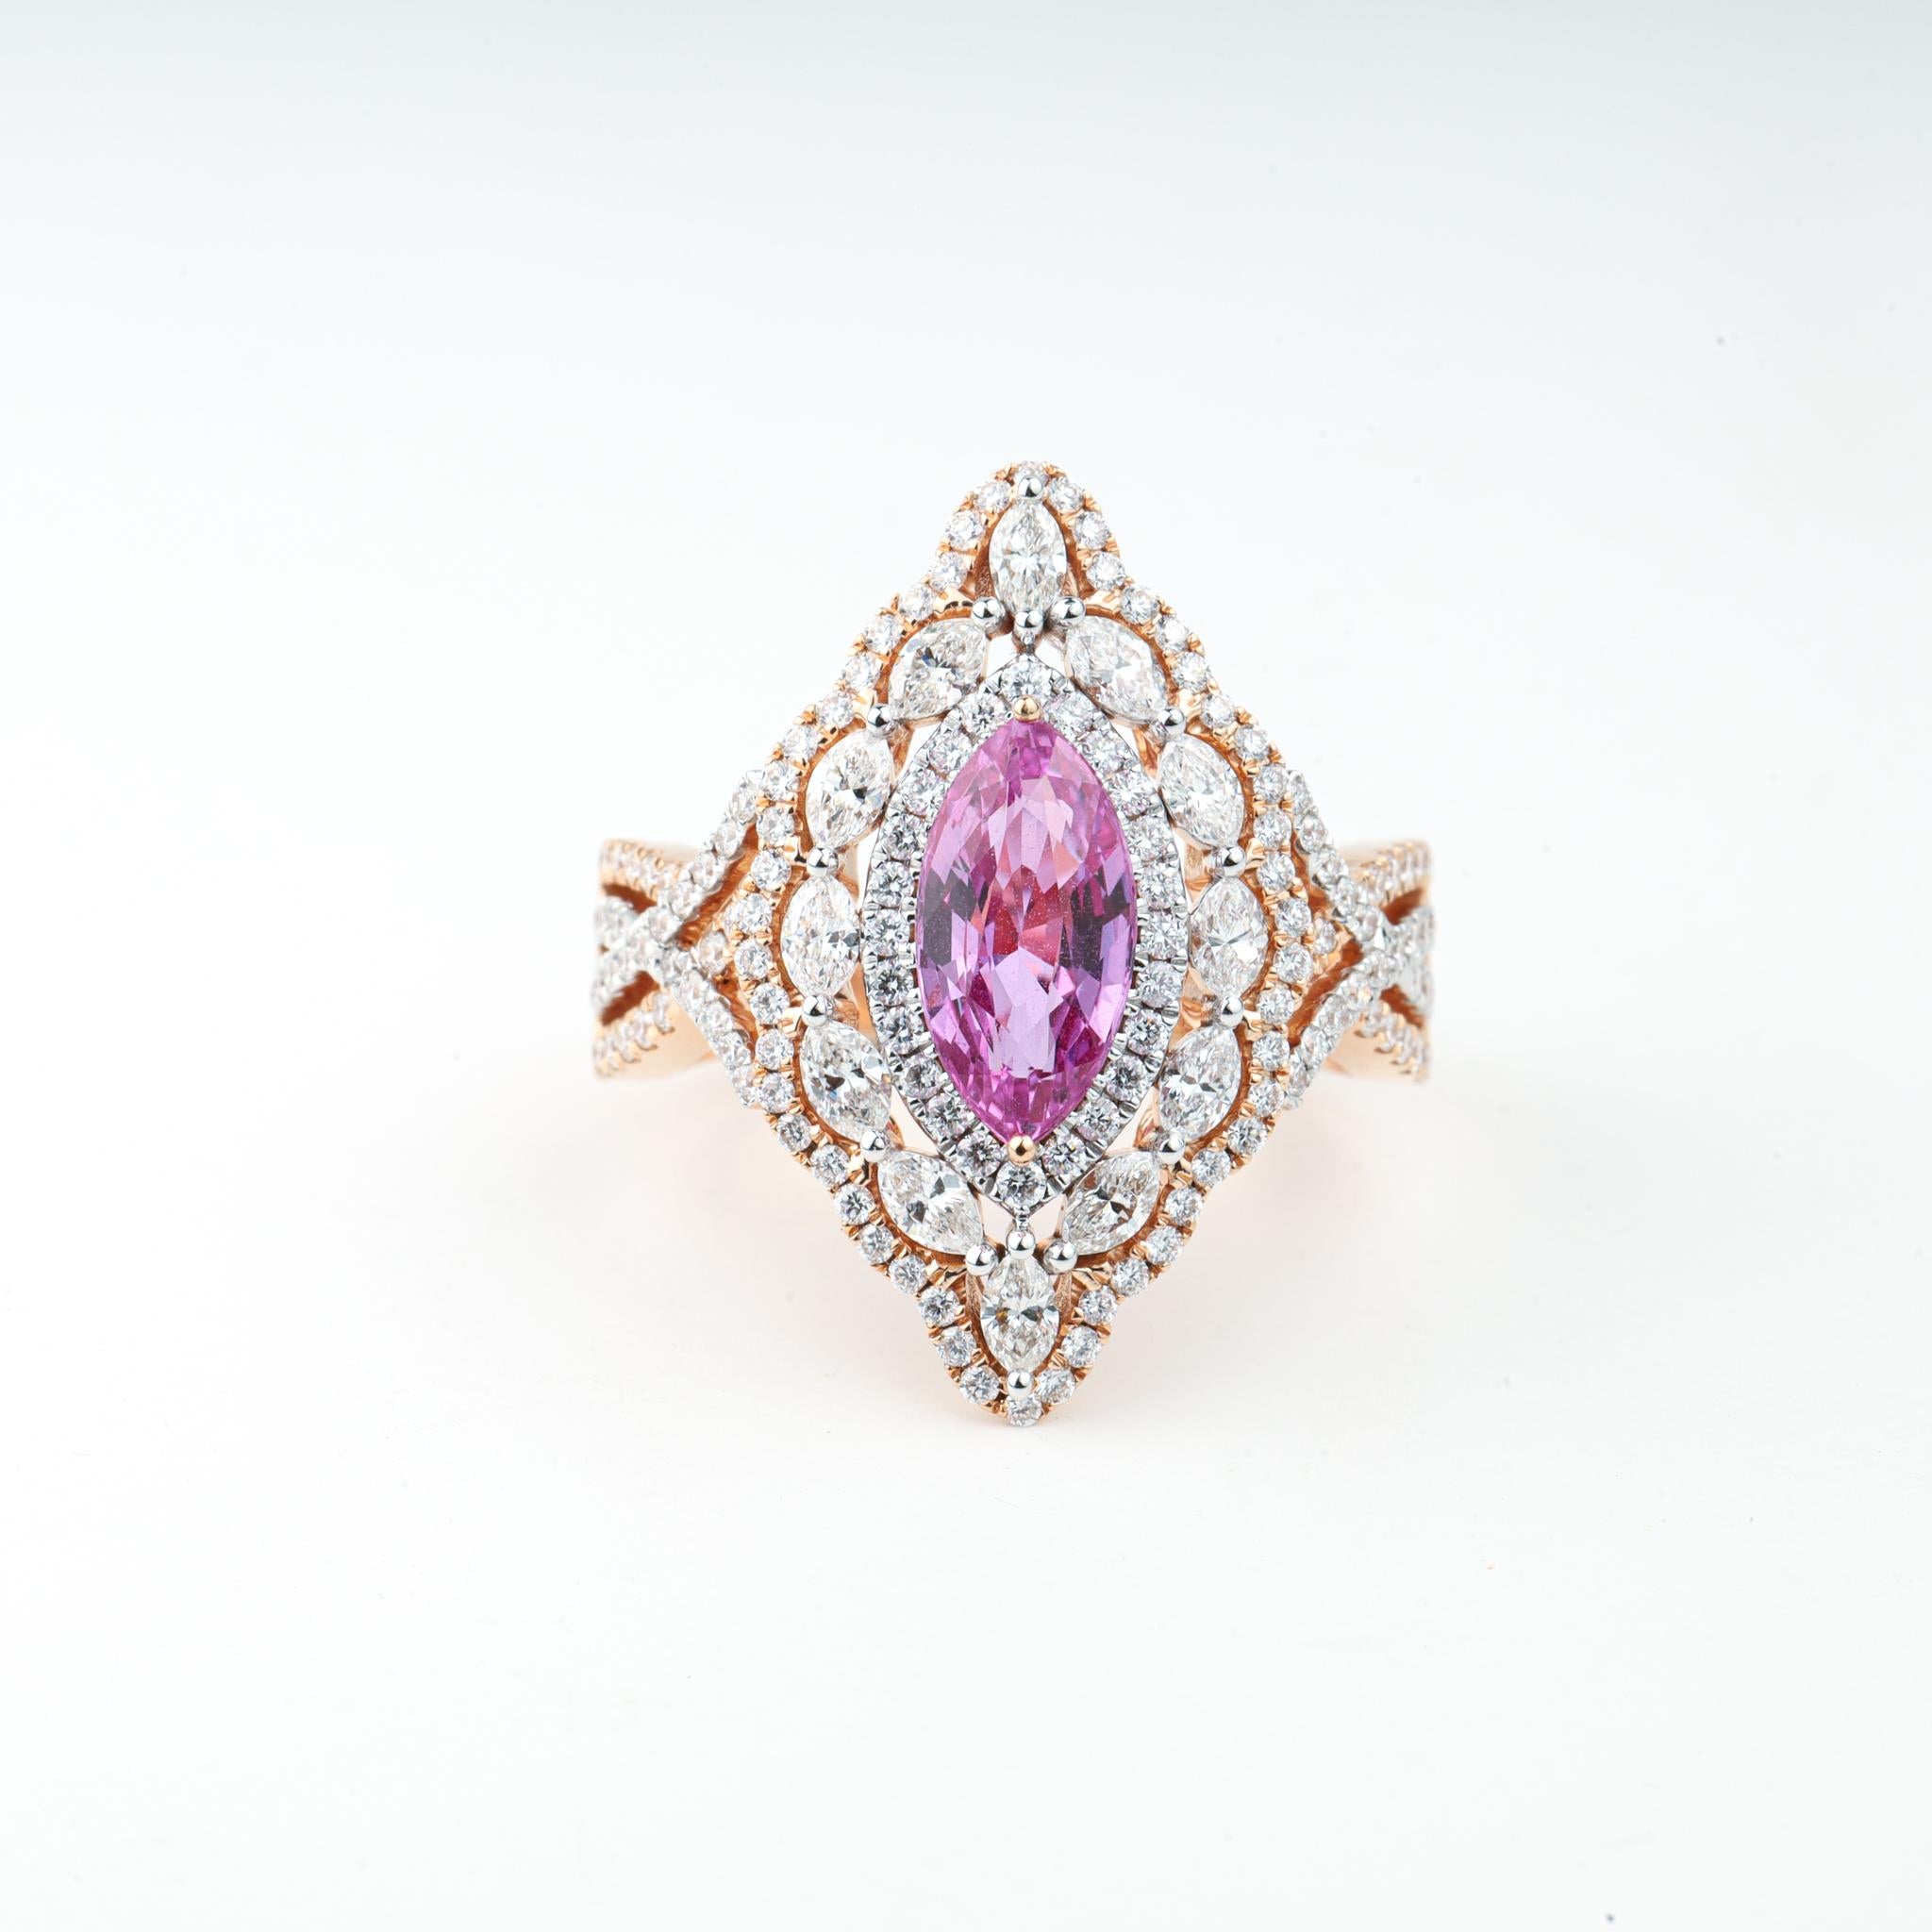 1.5 Carat Pink Sapphire Diamond Cocktail Engagement Ring in 18k Yellow Gold For Sale 2